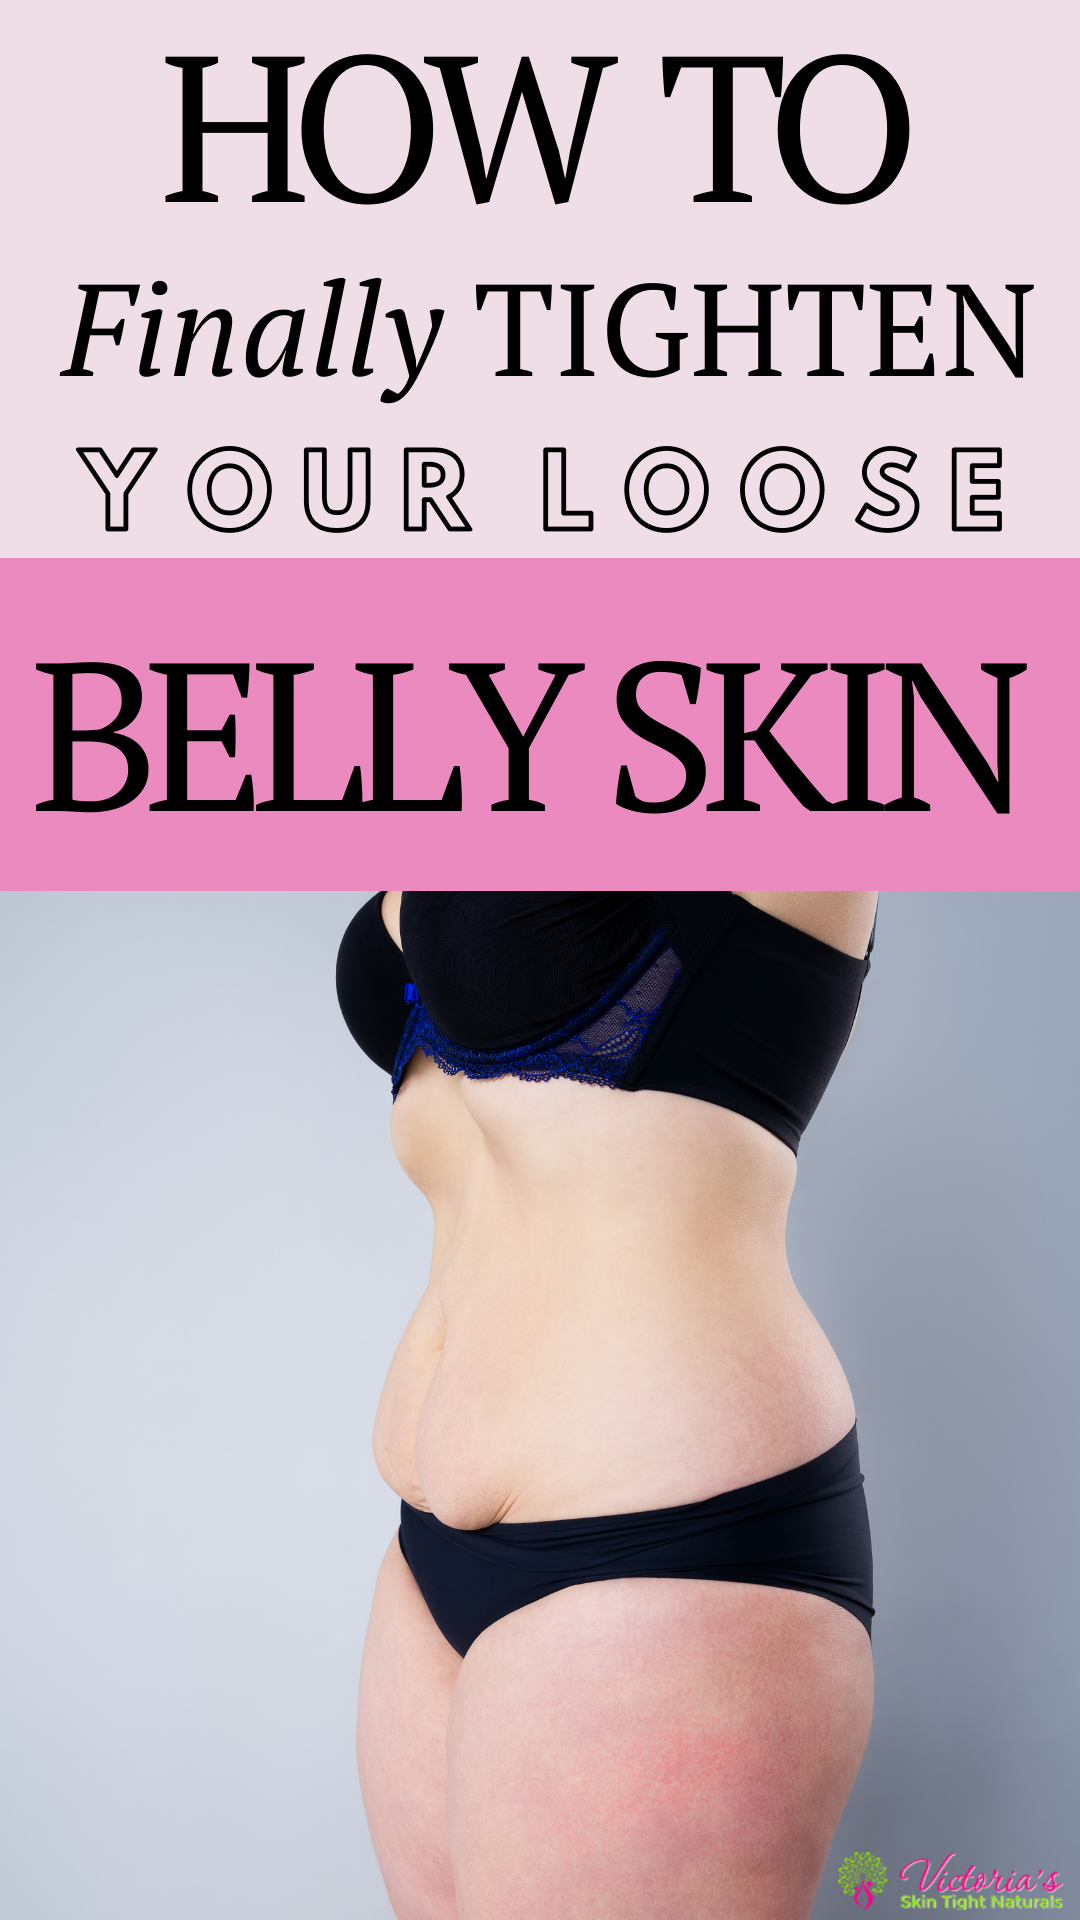 How To Finally Tighten Your Loose Belly Skin